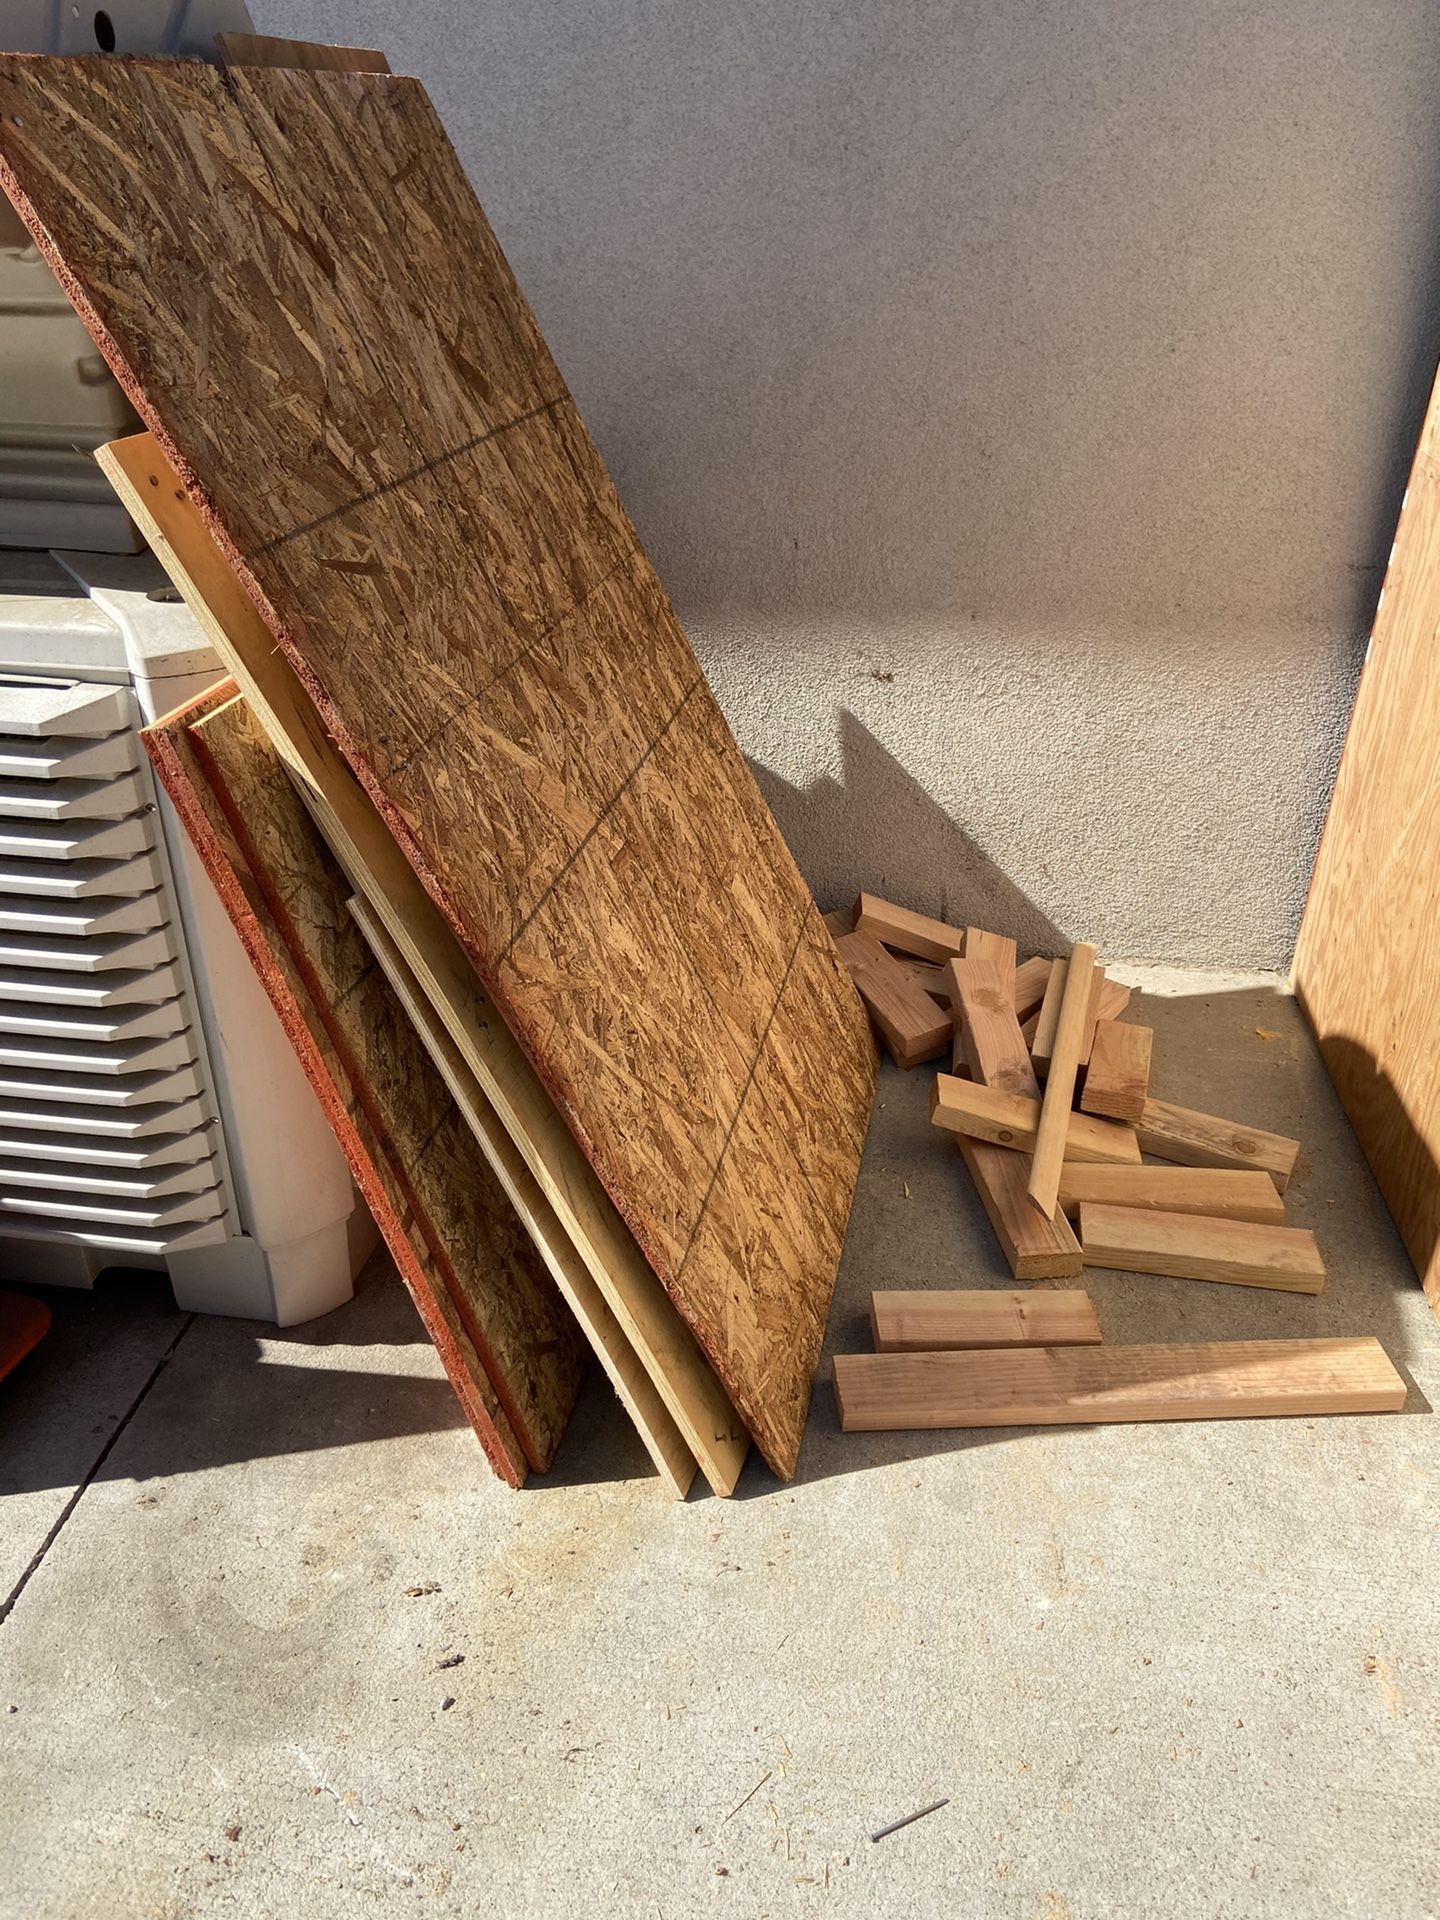 Free wood pieces